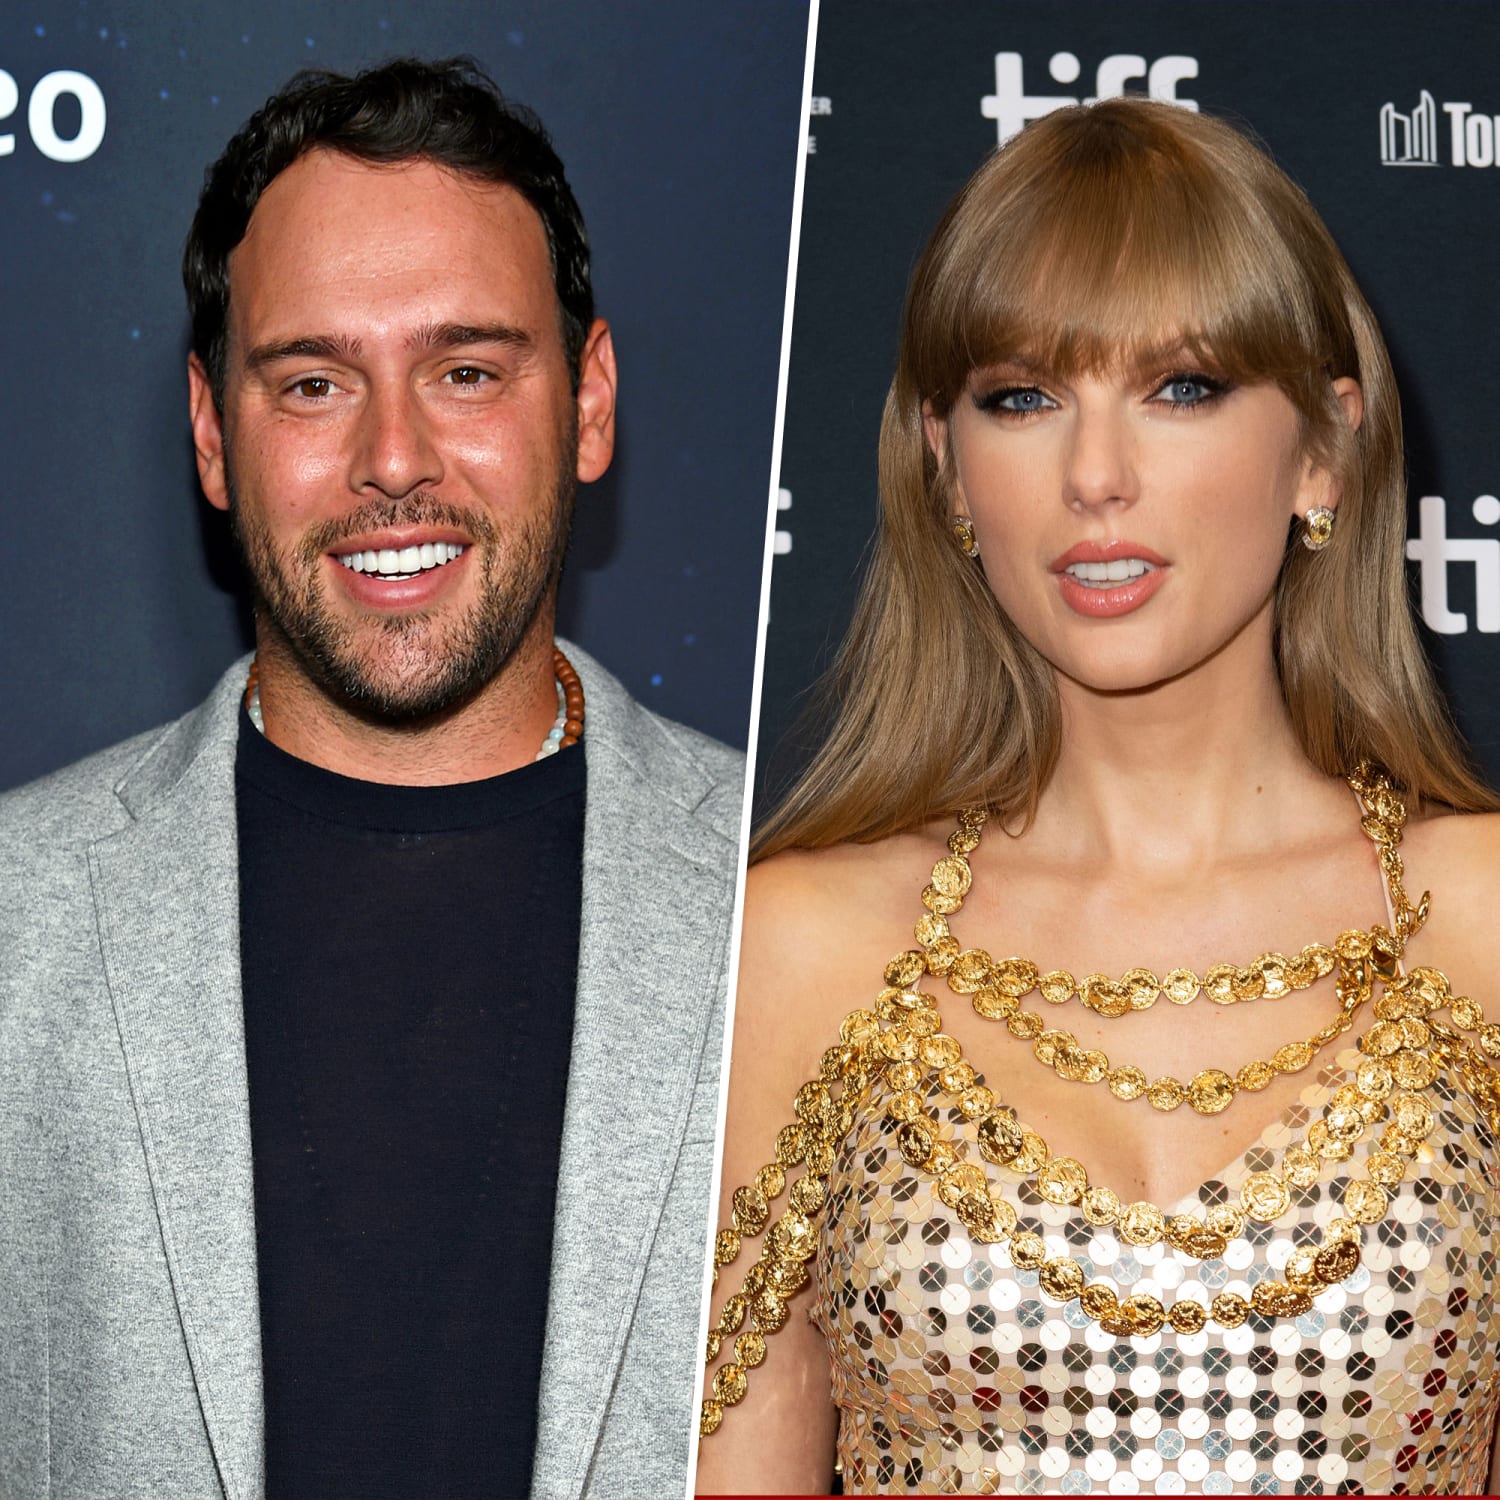 Taylor Swift Sex - Scooter Braun And Taylor Swift's Feud Timeline